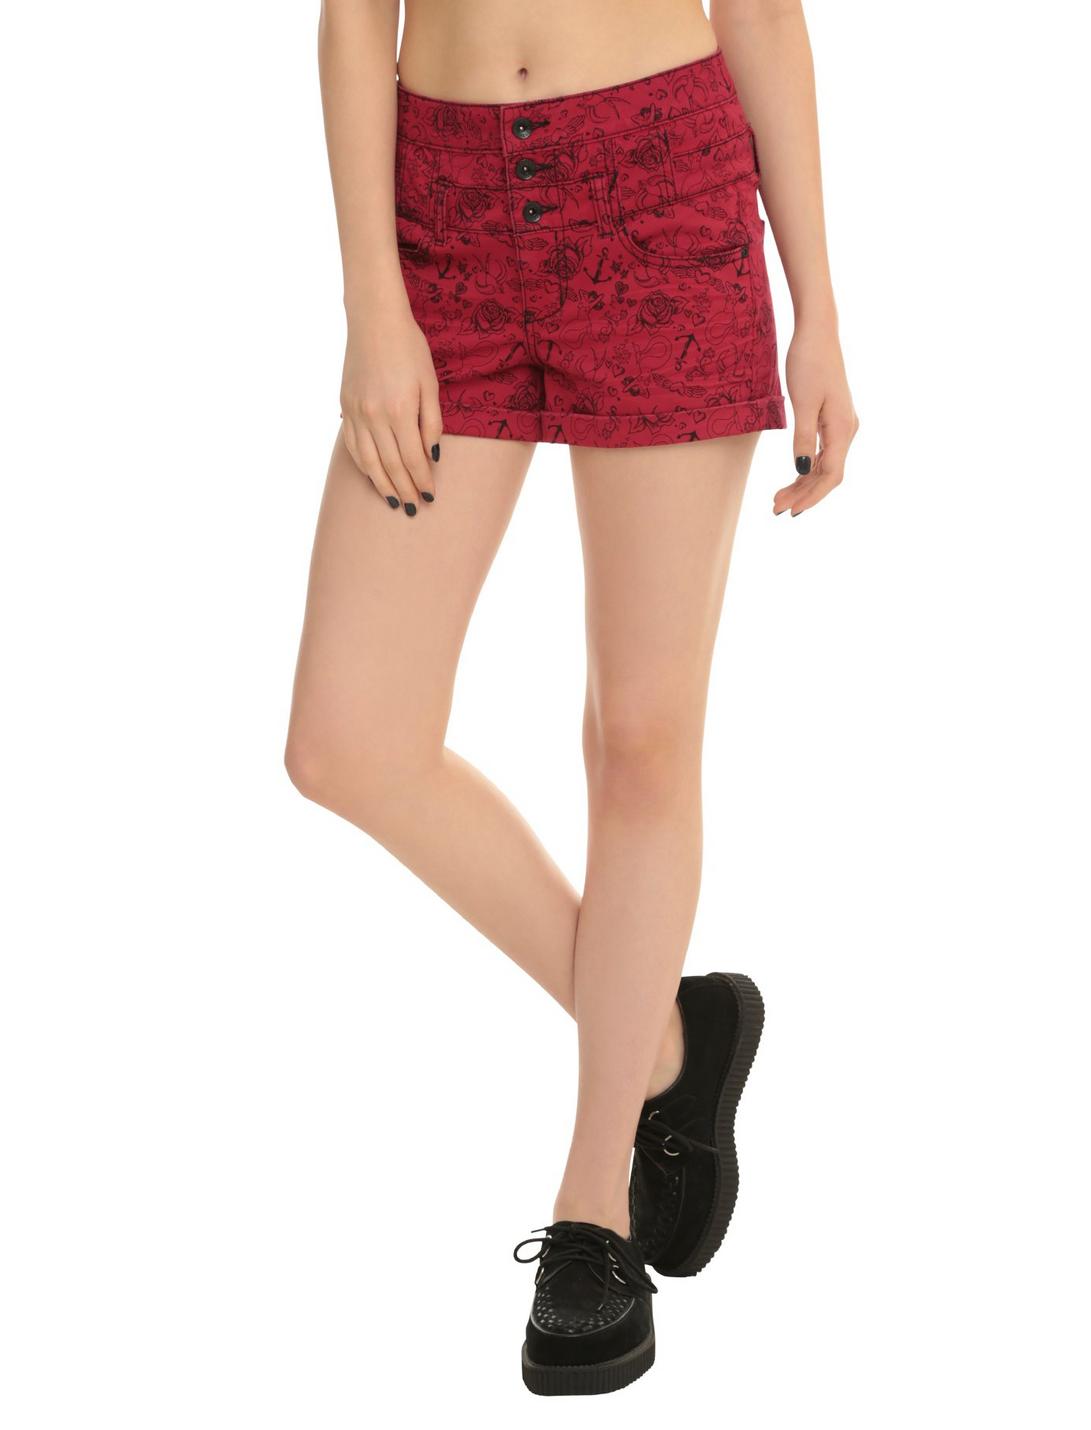 LOVEsick Red Pin-Up High-Waisted Shorts, RED, hi-res